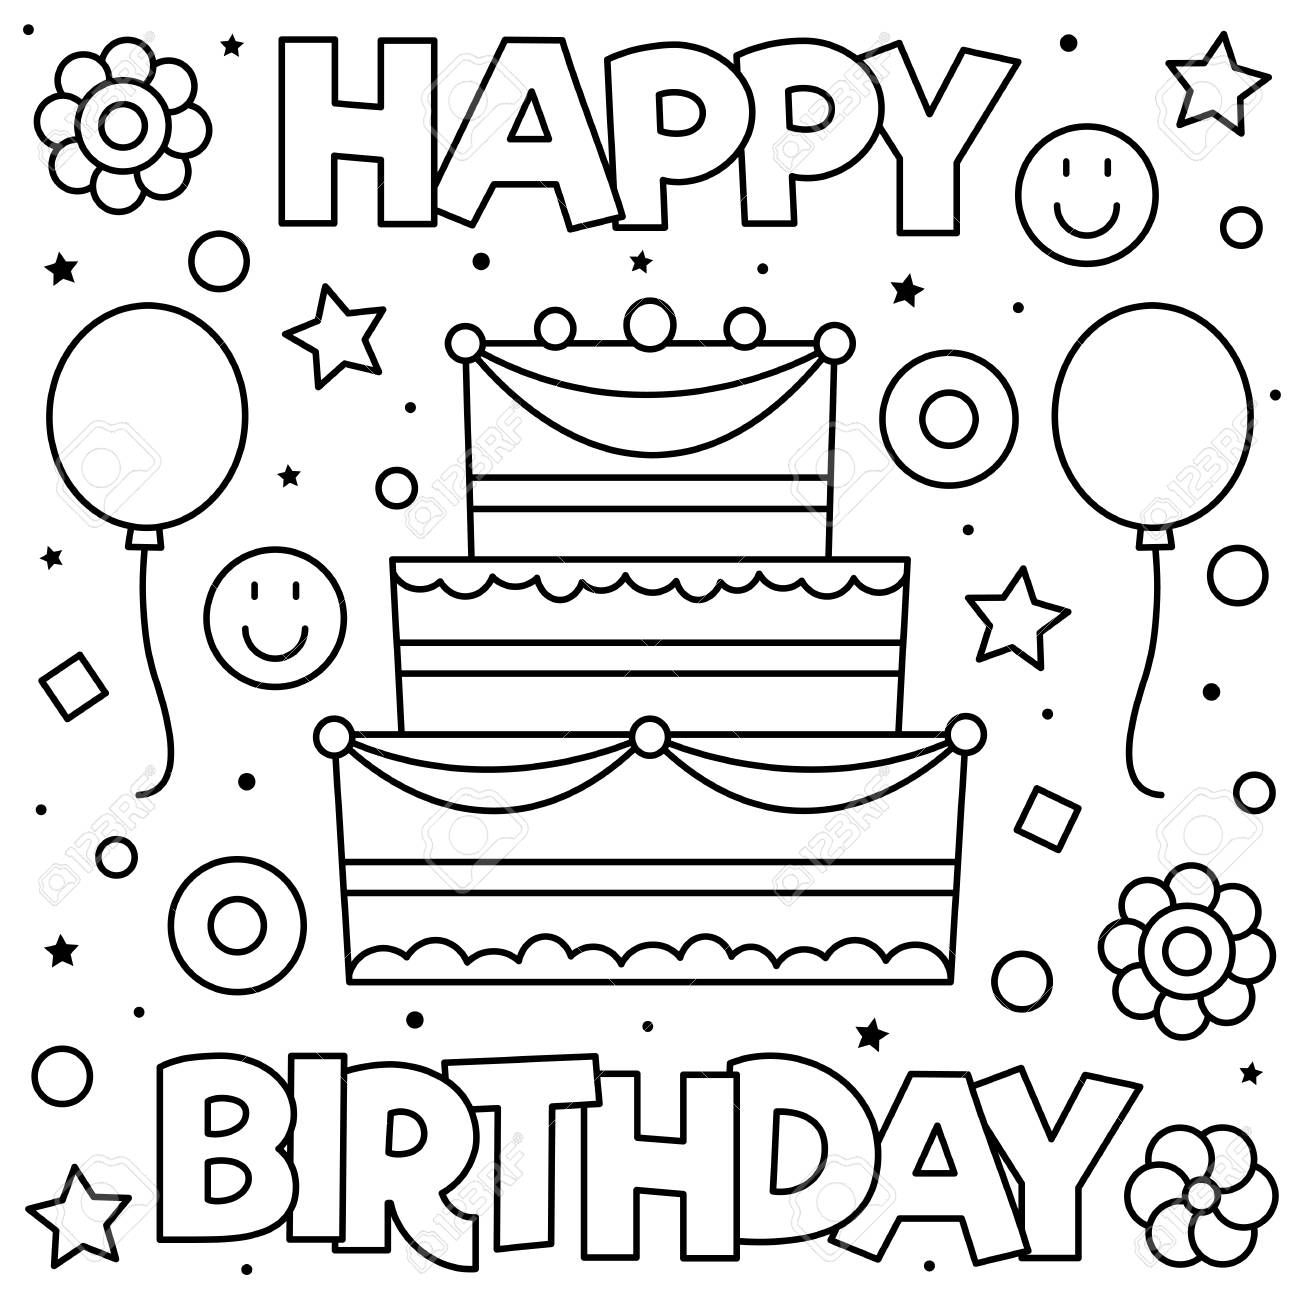 Colouring Page Vector Illustration Happy Birthday Coloring Pages